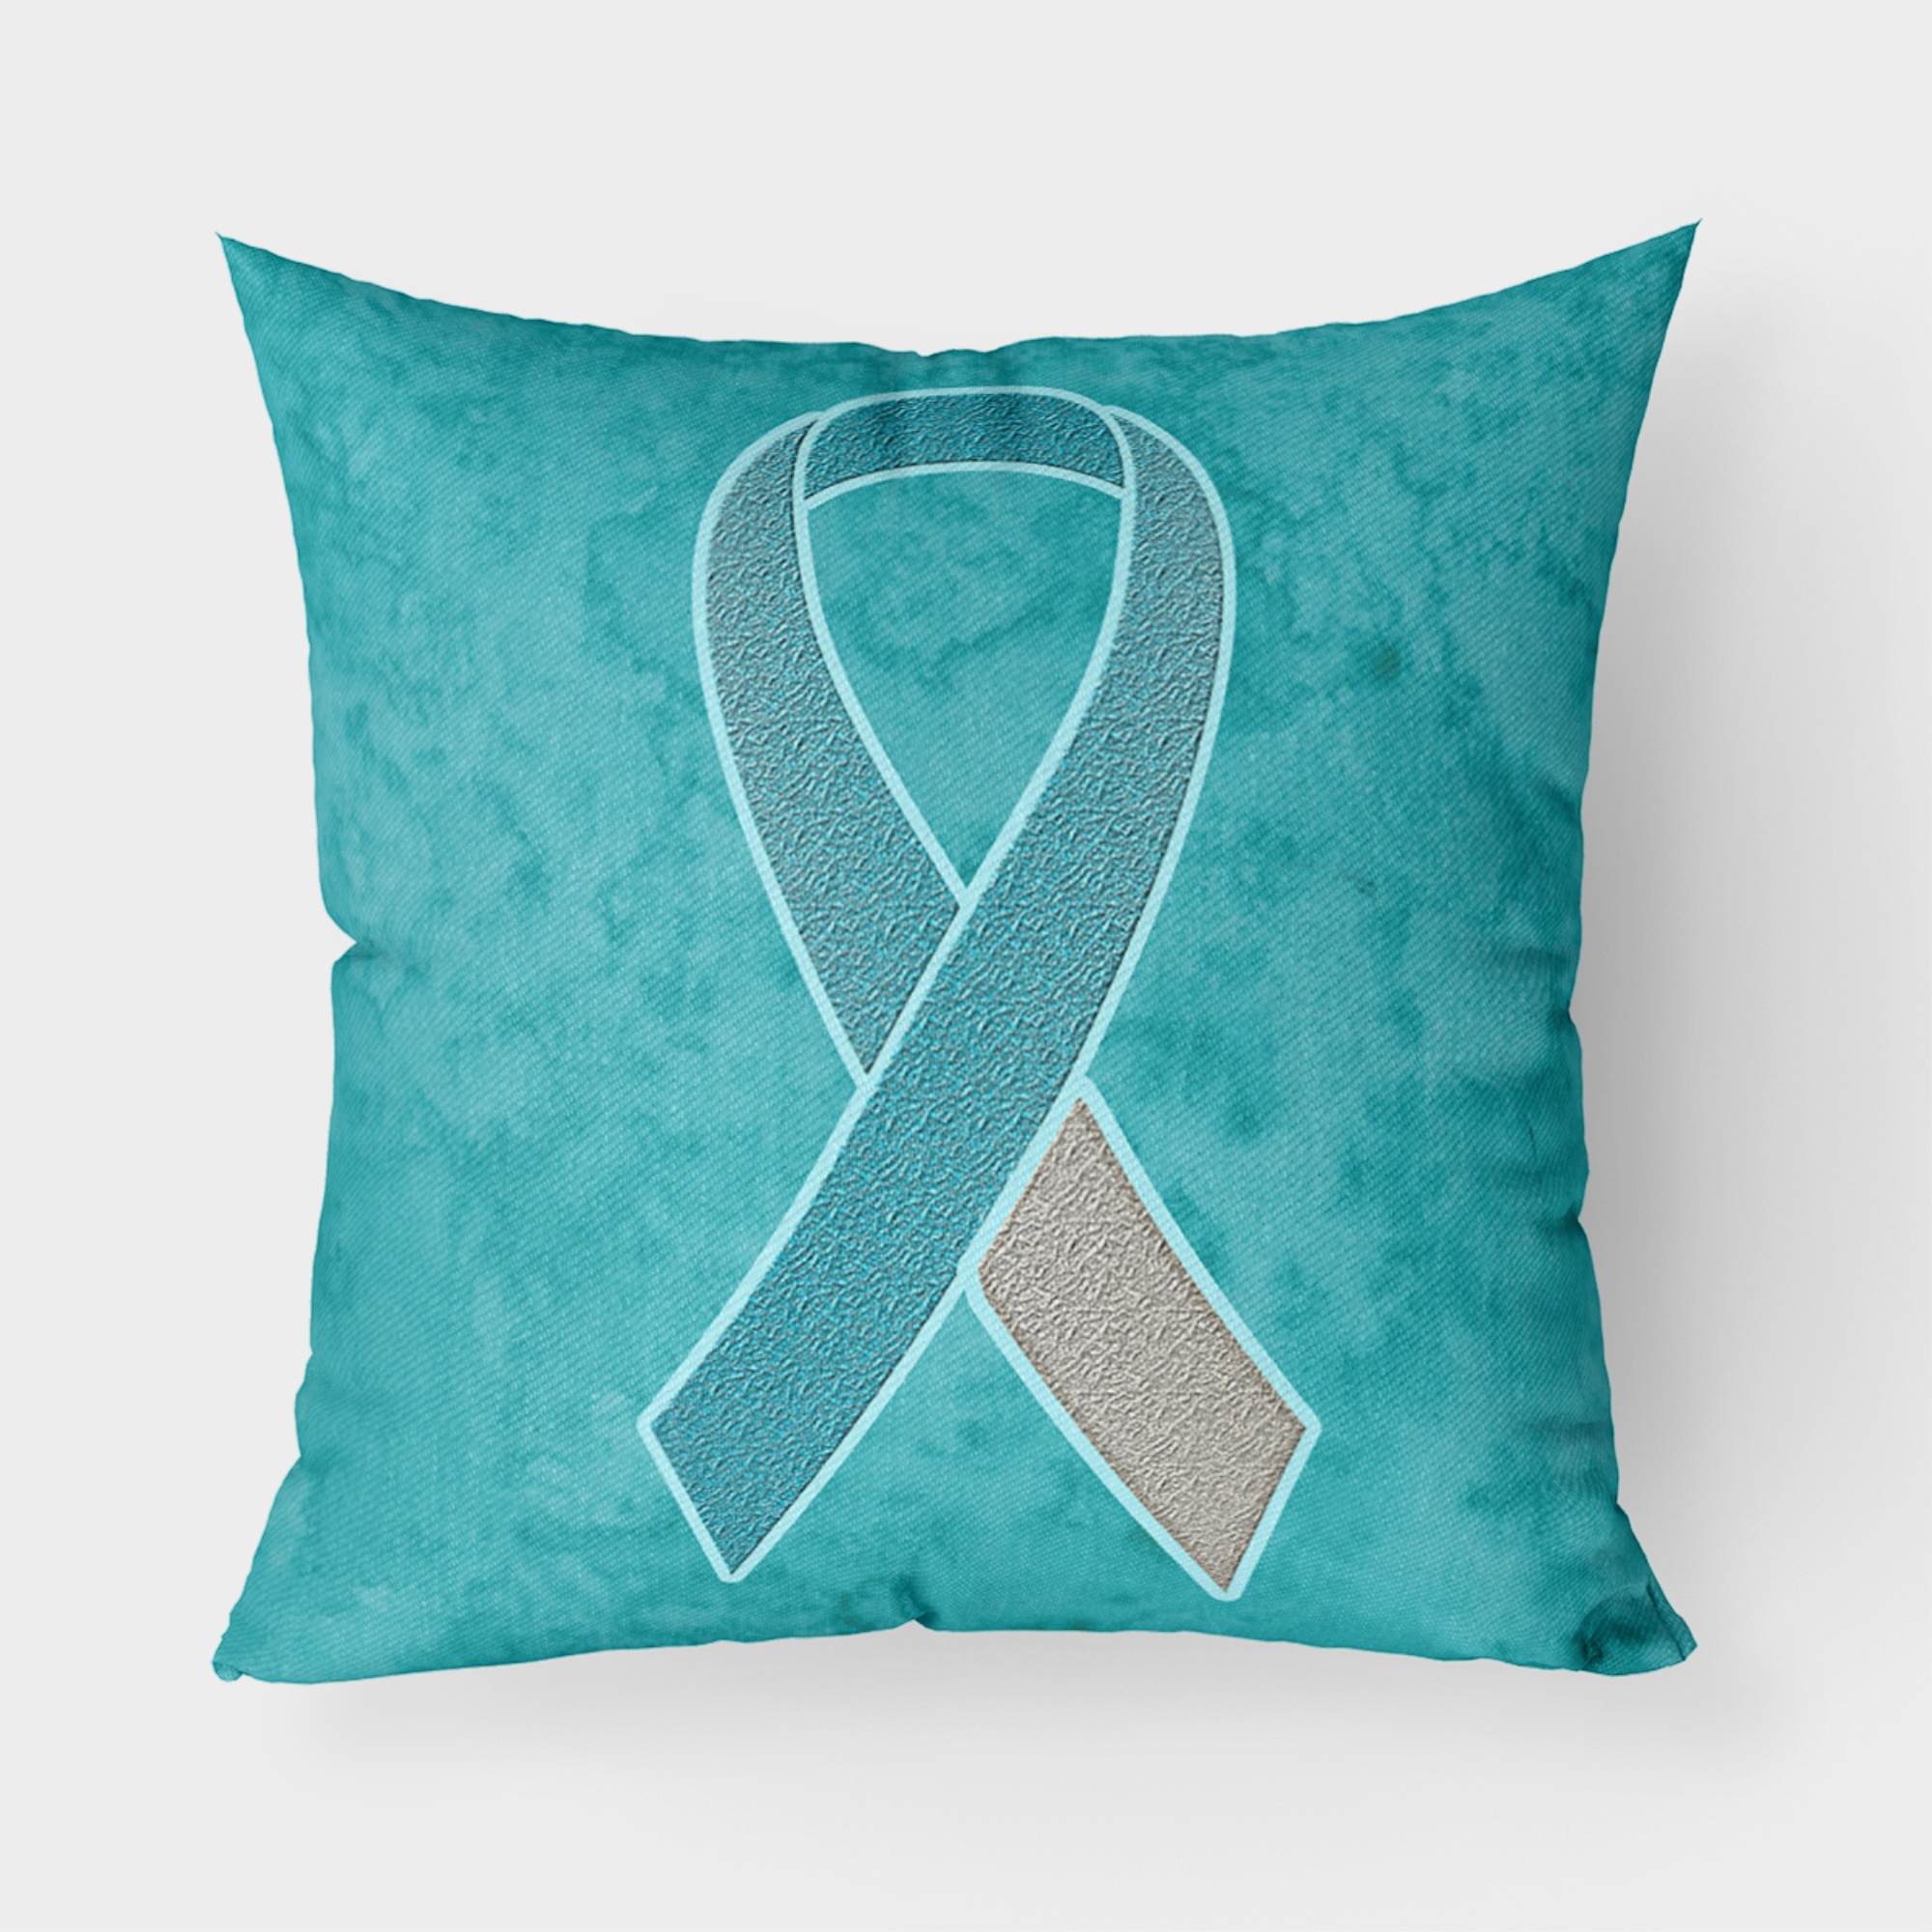 Caroline's Treasures "Caroline's Treasures AN1215PW1414 Teal/White Ribbon for Cervical Cancer Awareness Pillow, Large, Multicolor"